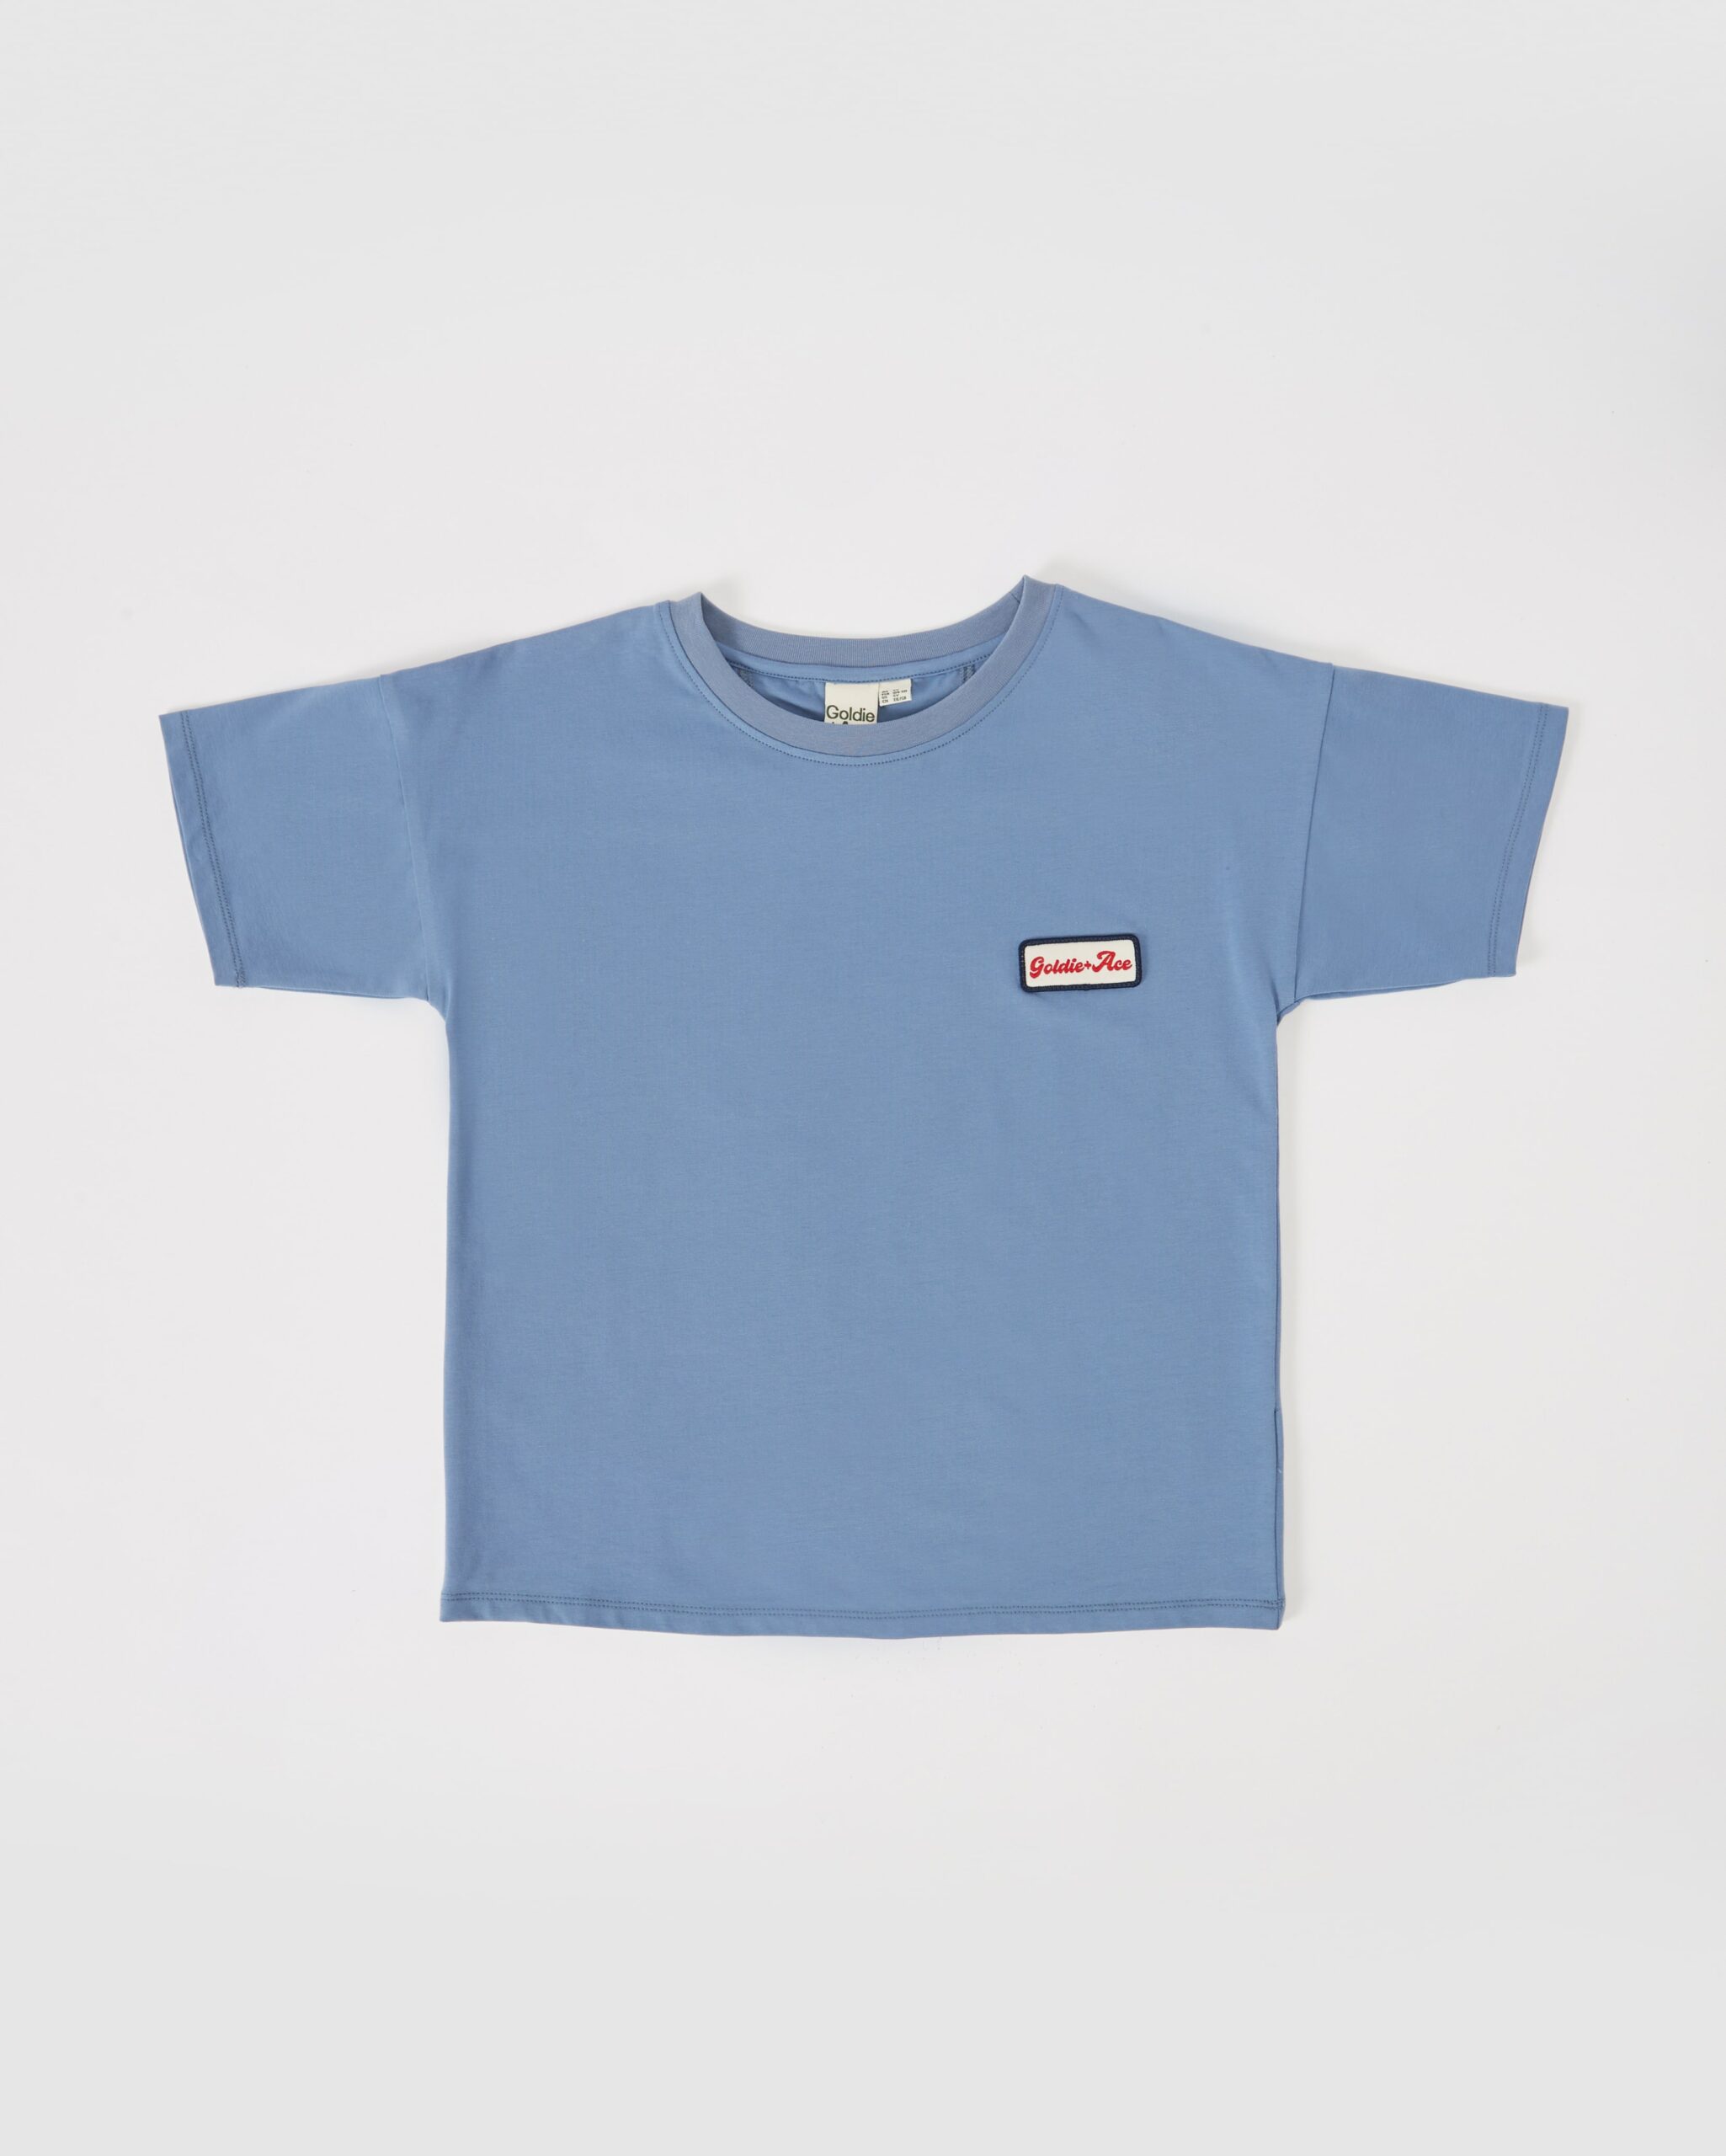 Goldie & Ace Logo T-Shirt - Woodend General